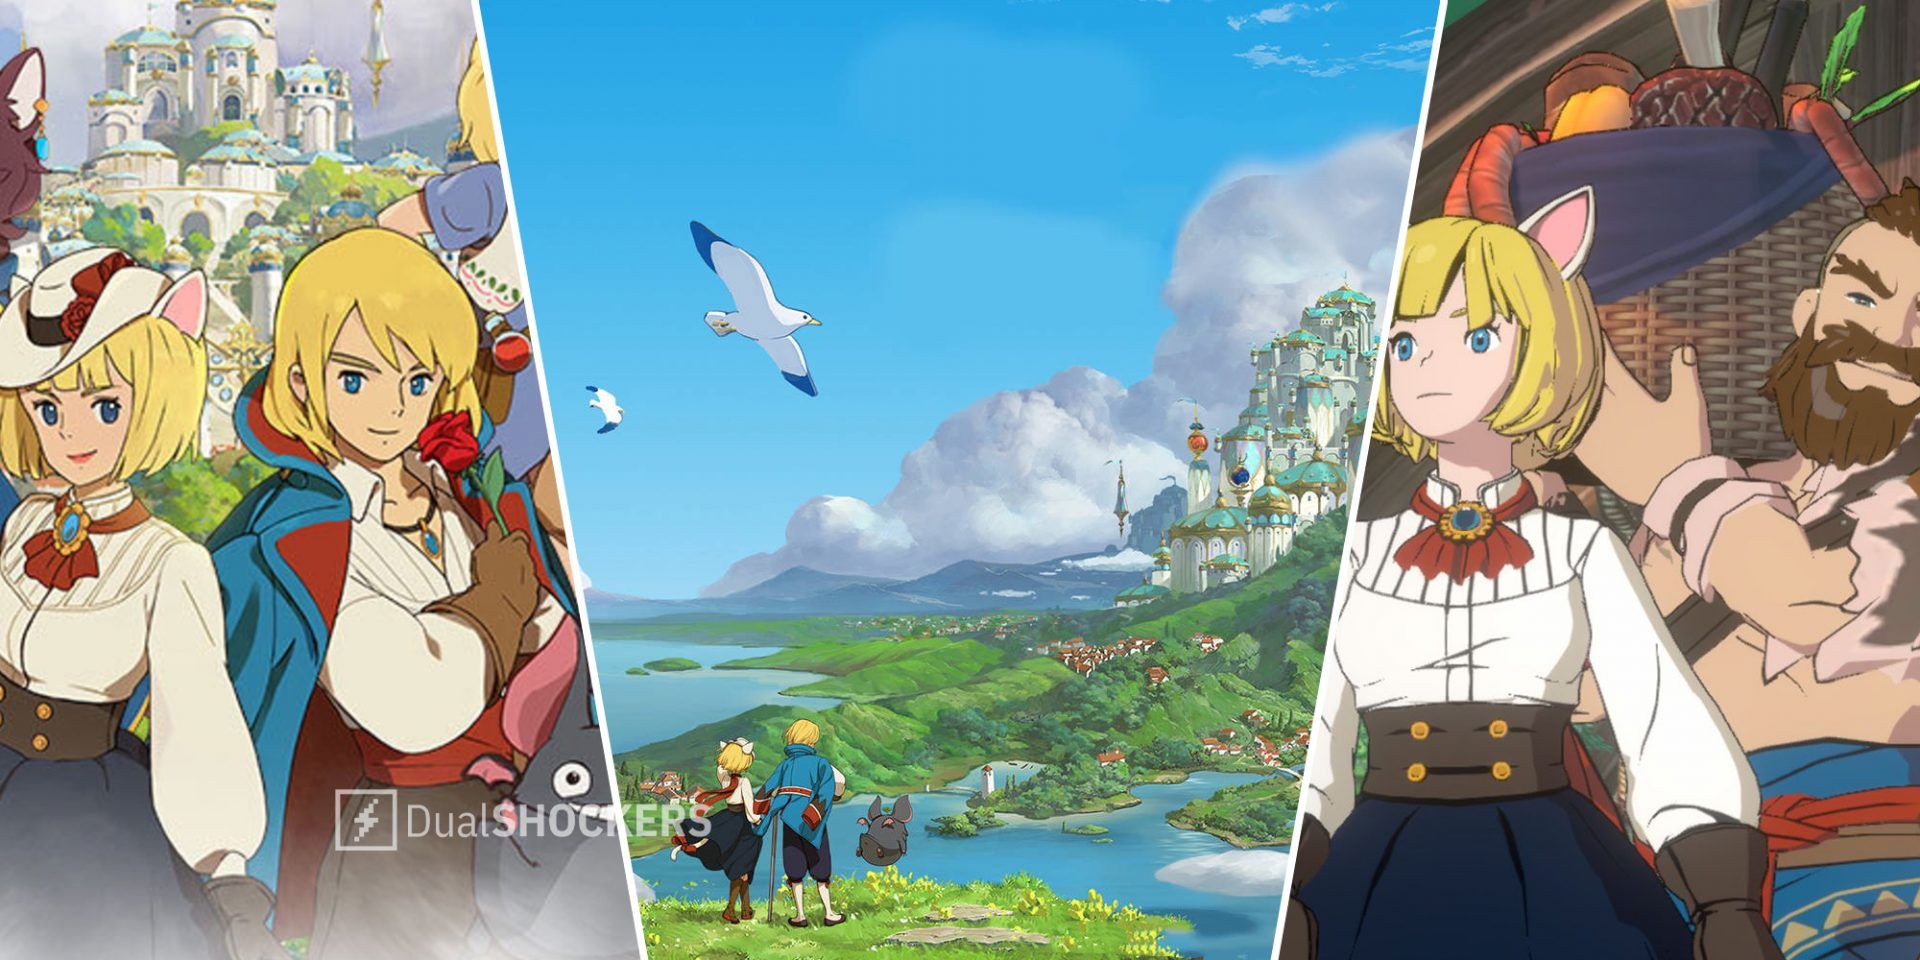 Ni No Kuni Cross Worlds Witch and Swordsman on left, Witch and Swordsman overlooking the landscape in middle, Witch and Destroyer on right